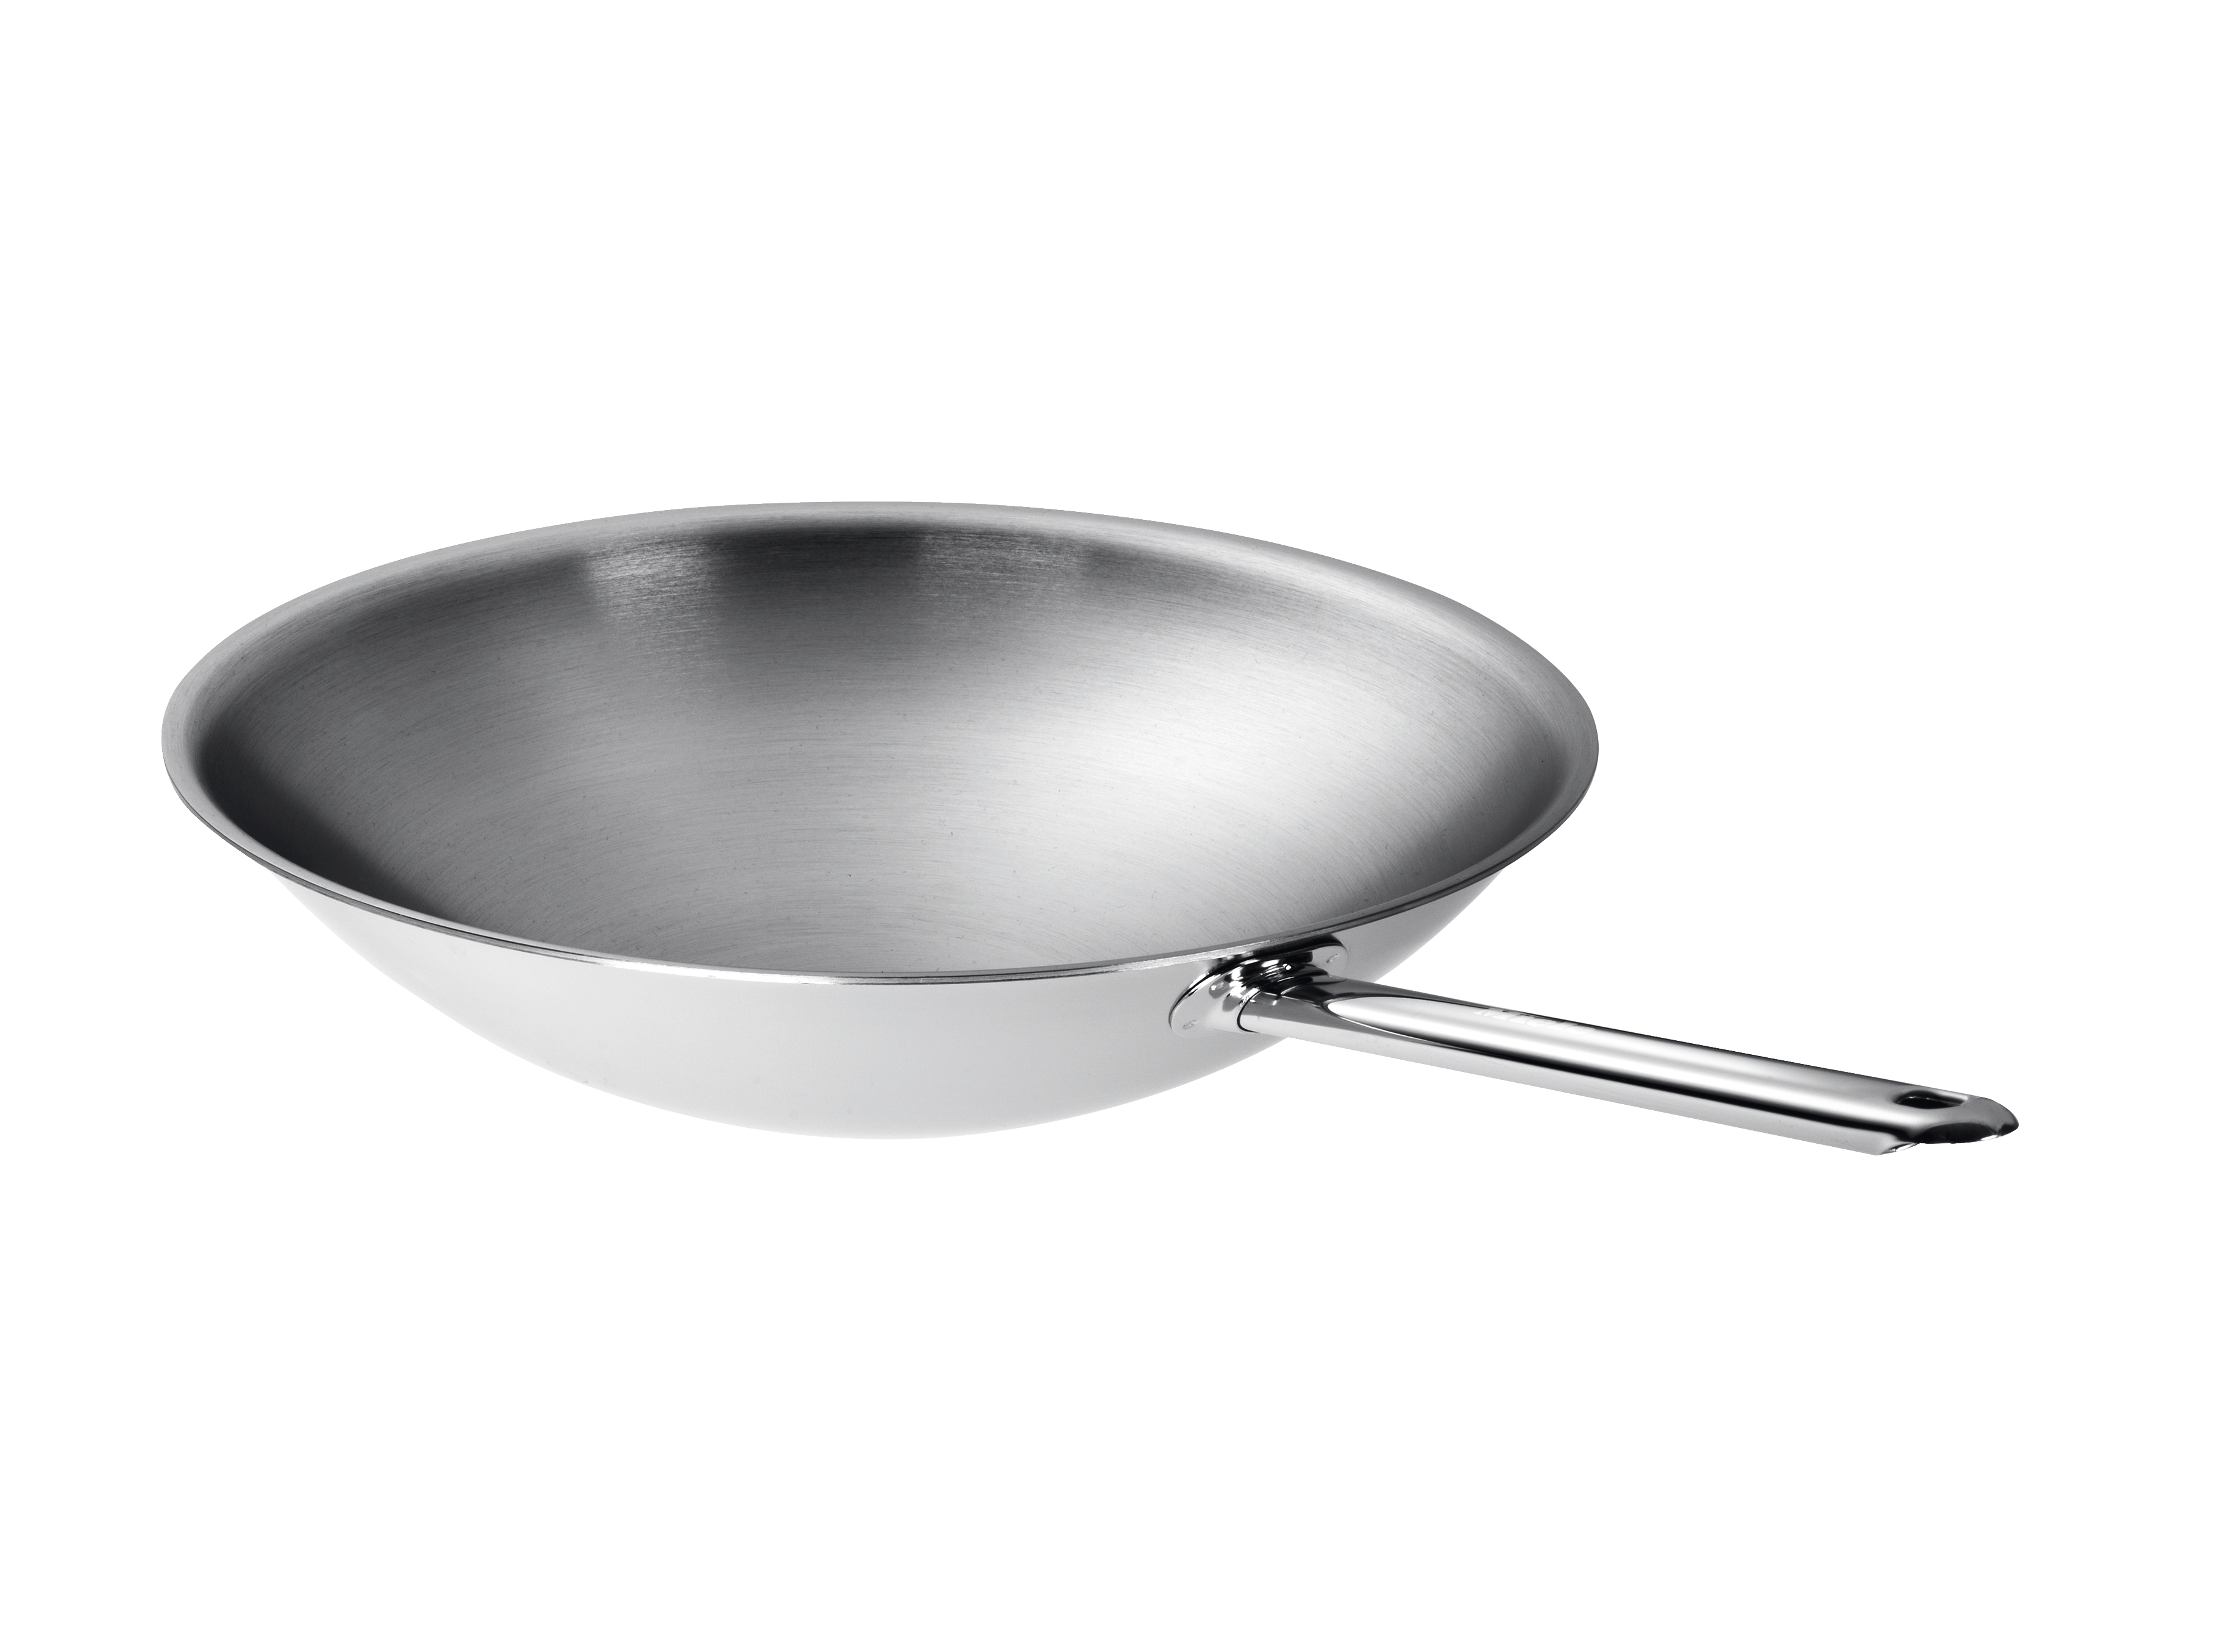 CSWP 1450Wok pan for CombiSet designed to fit perfectly into the trough of Miele's induction wok.